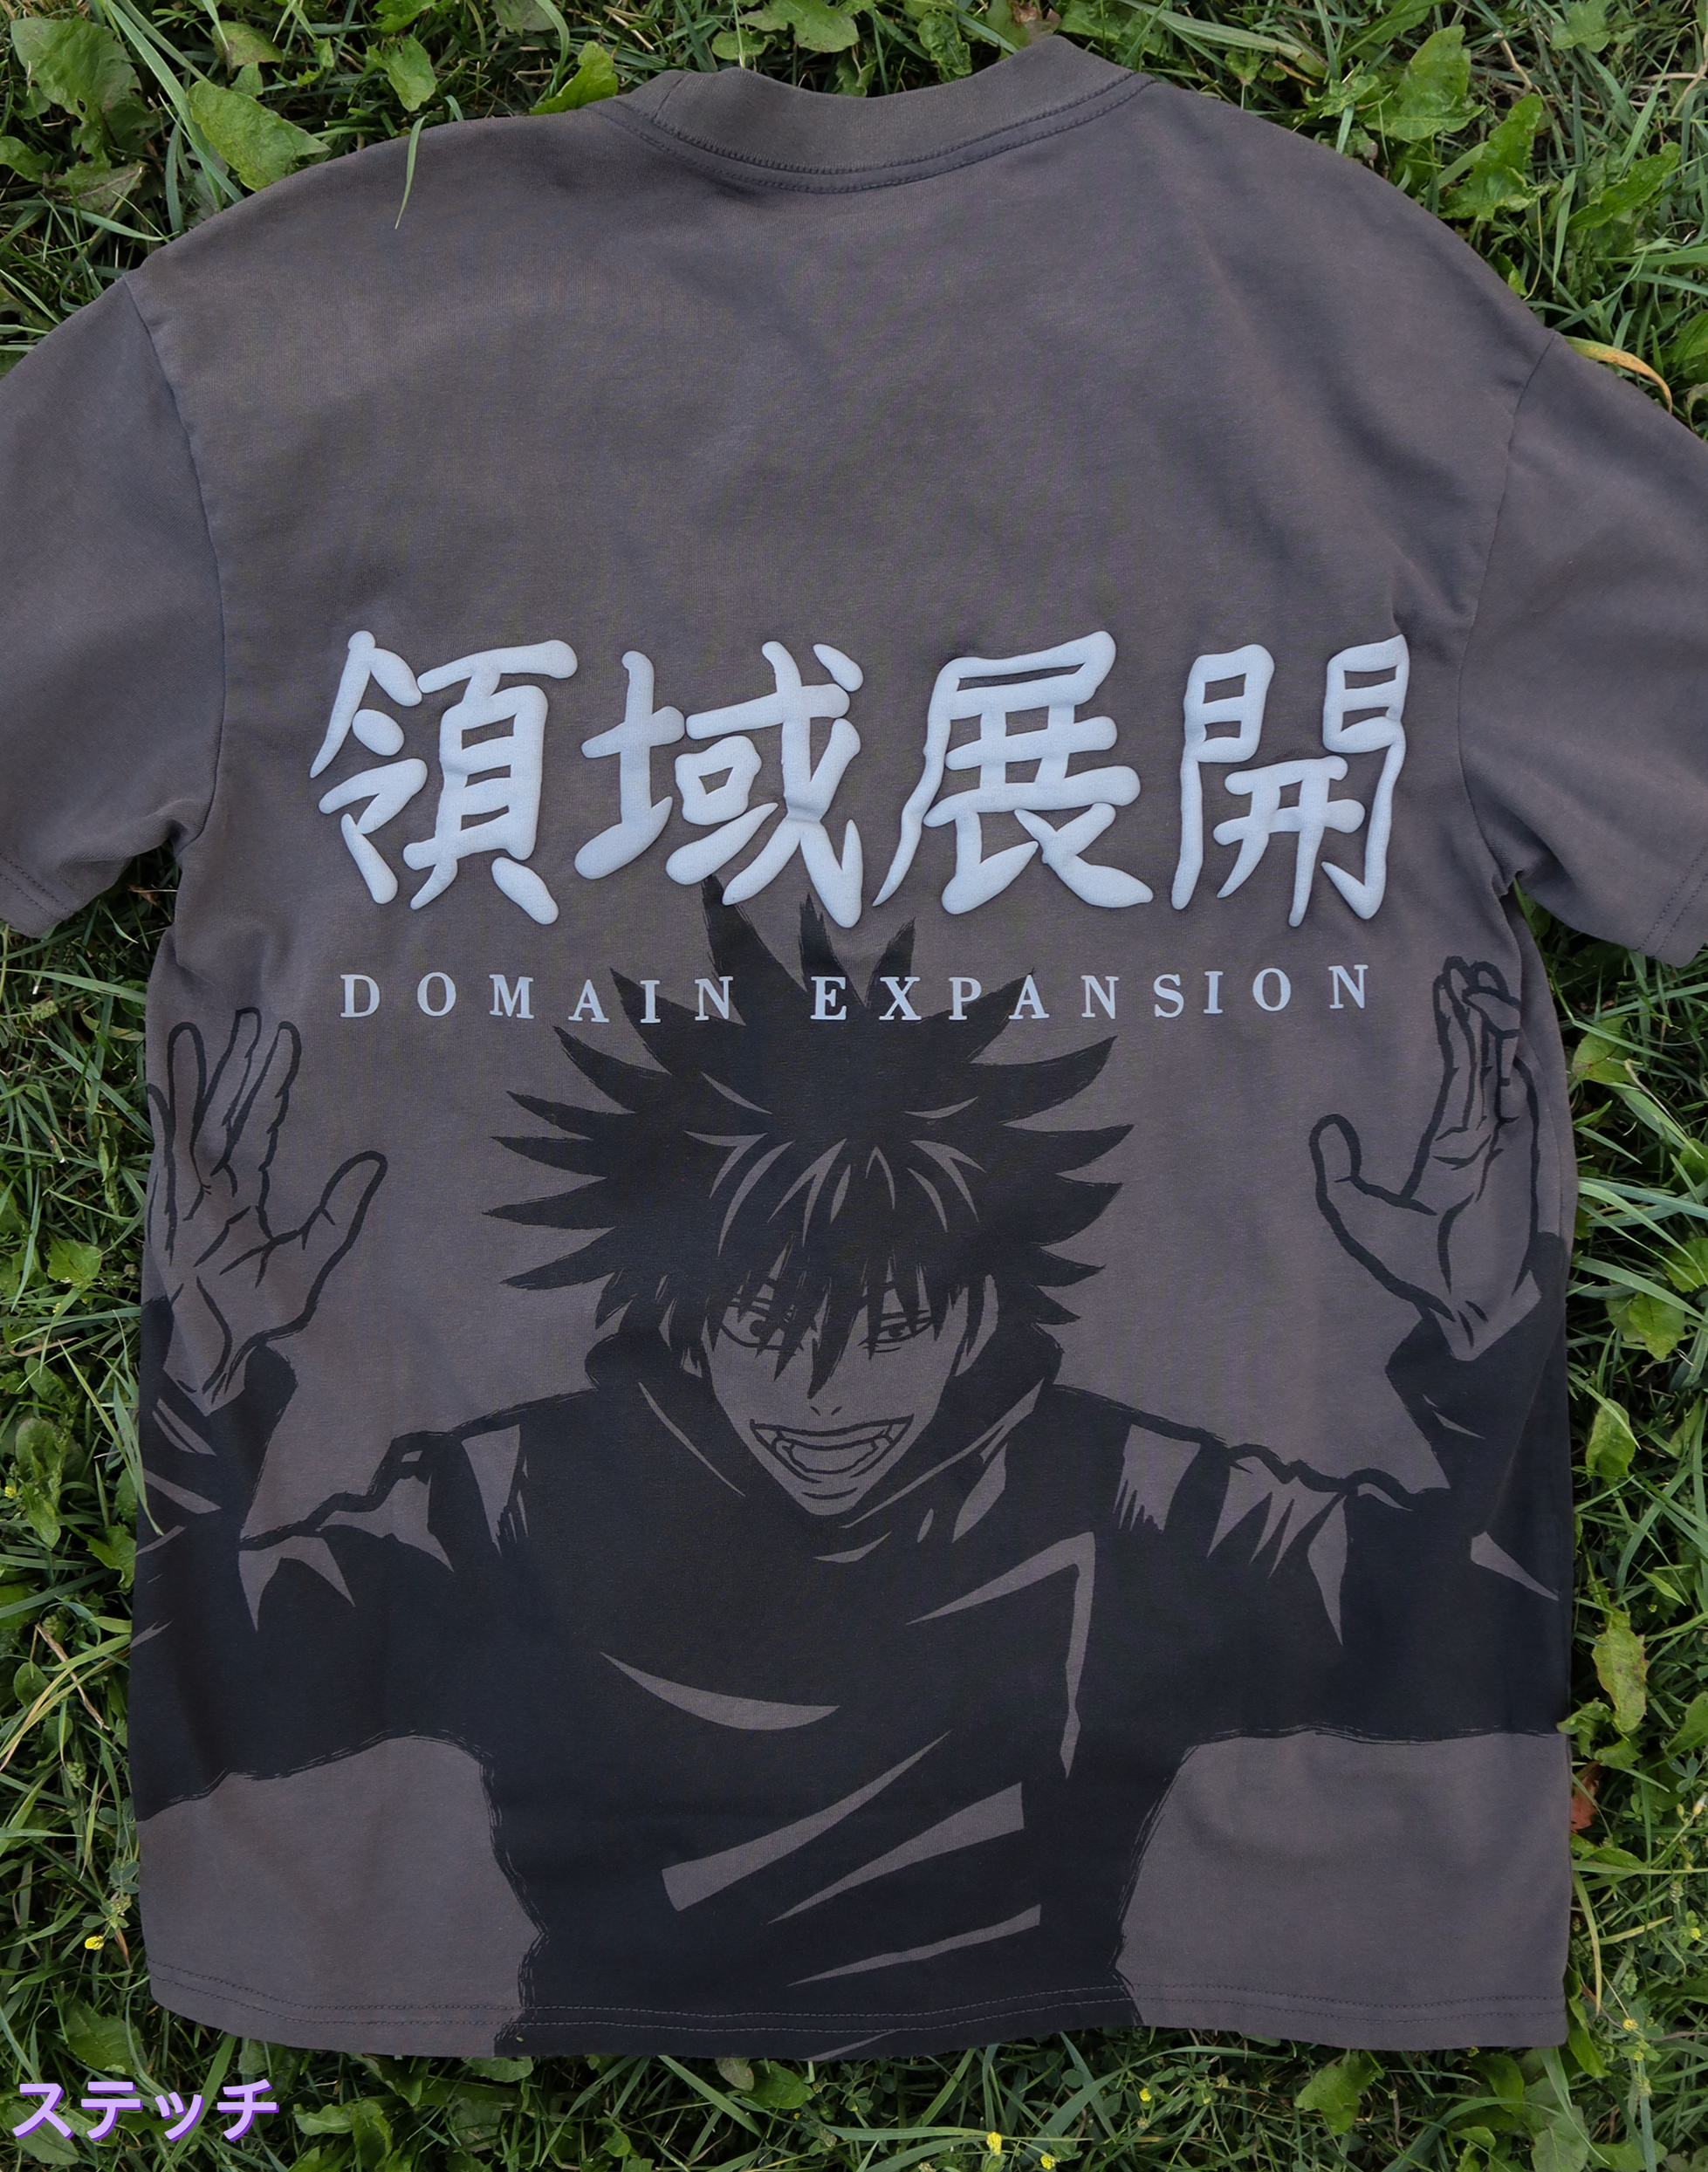 DOMAIN EXPANSION SHIRT *LIMITED* (SIZE UP)